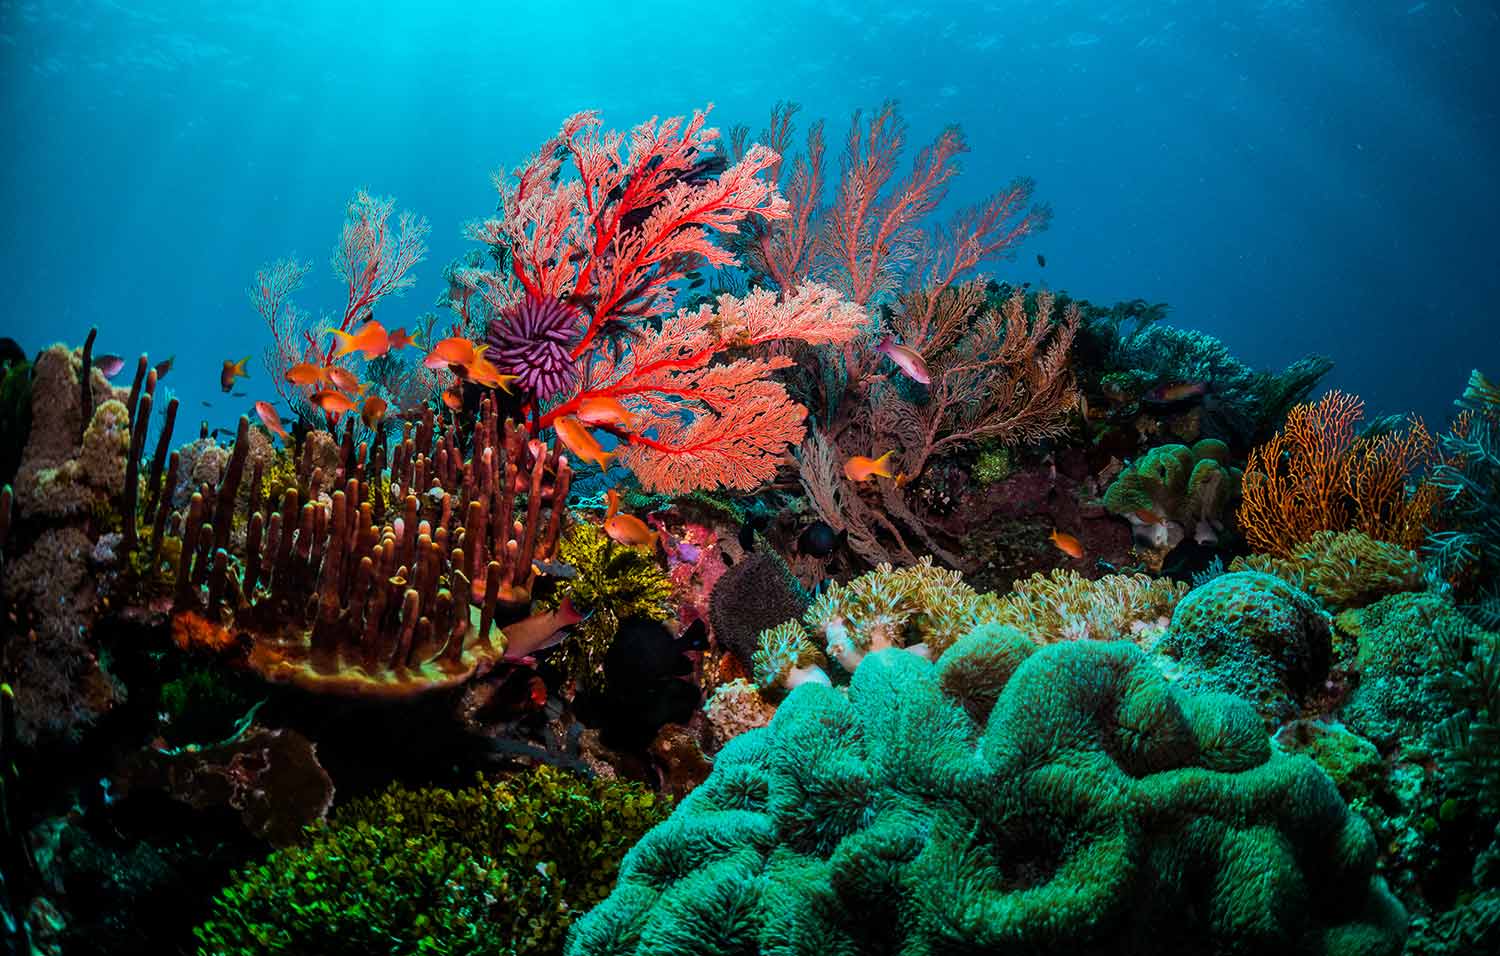 A reef made up of many different corals, surrounded by colourful fish